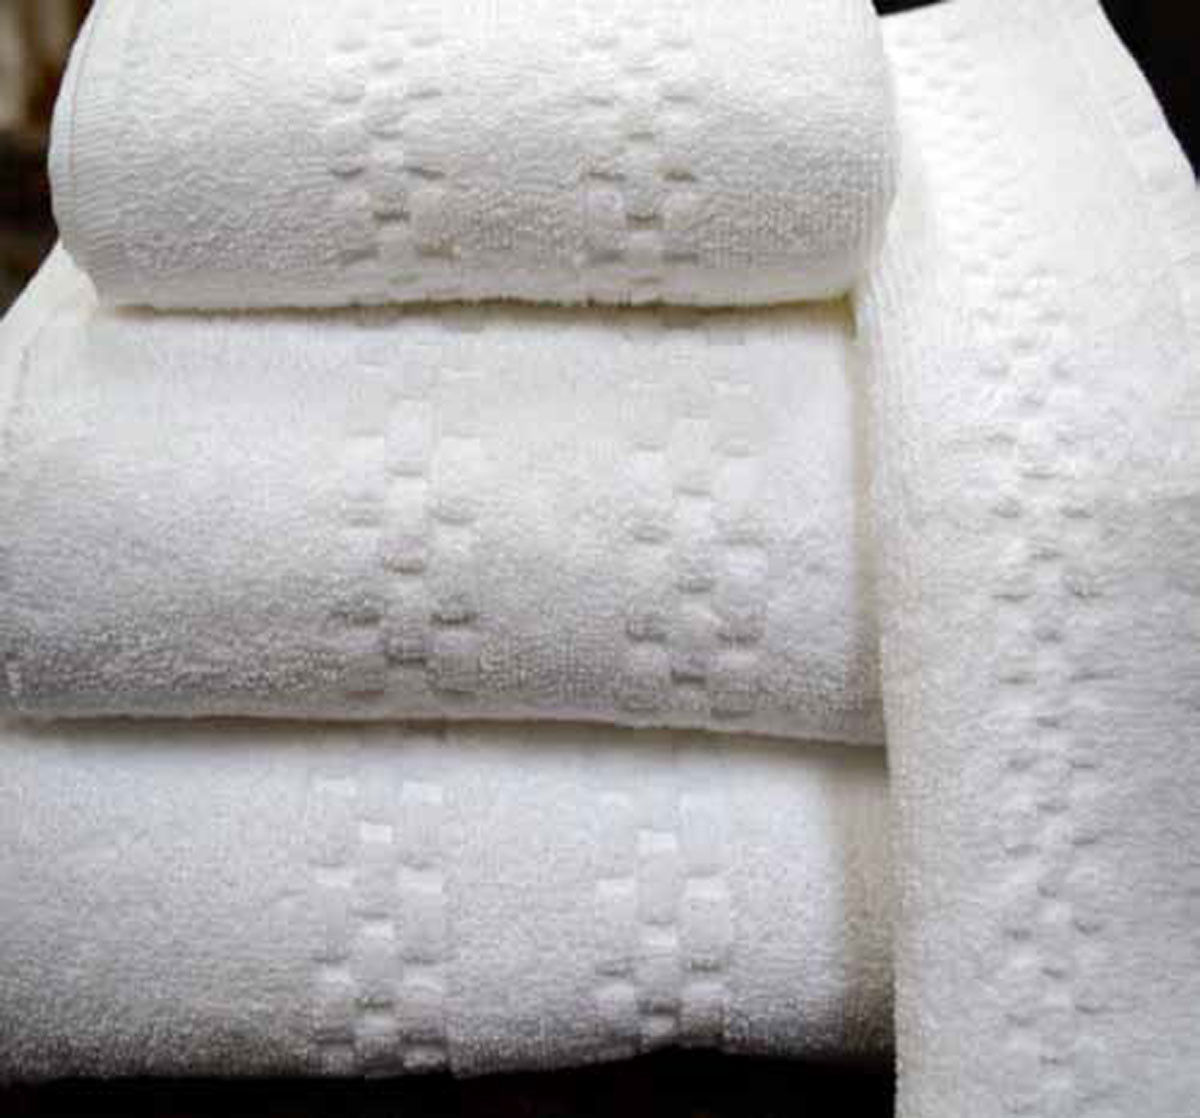 Can you define the design of the Oxford Viceroy Room towels?